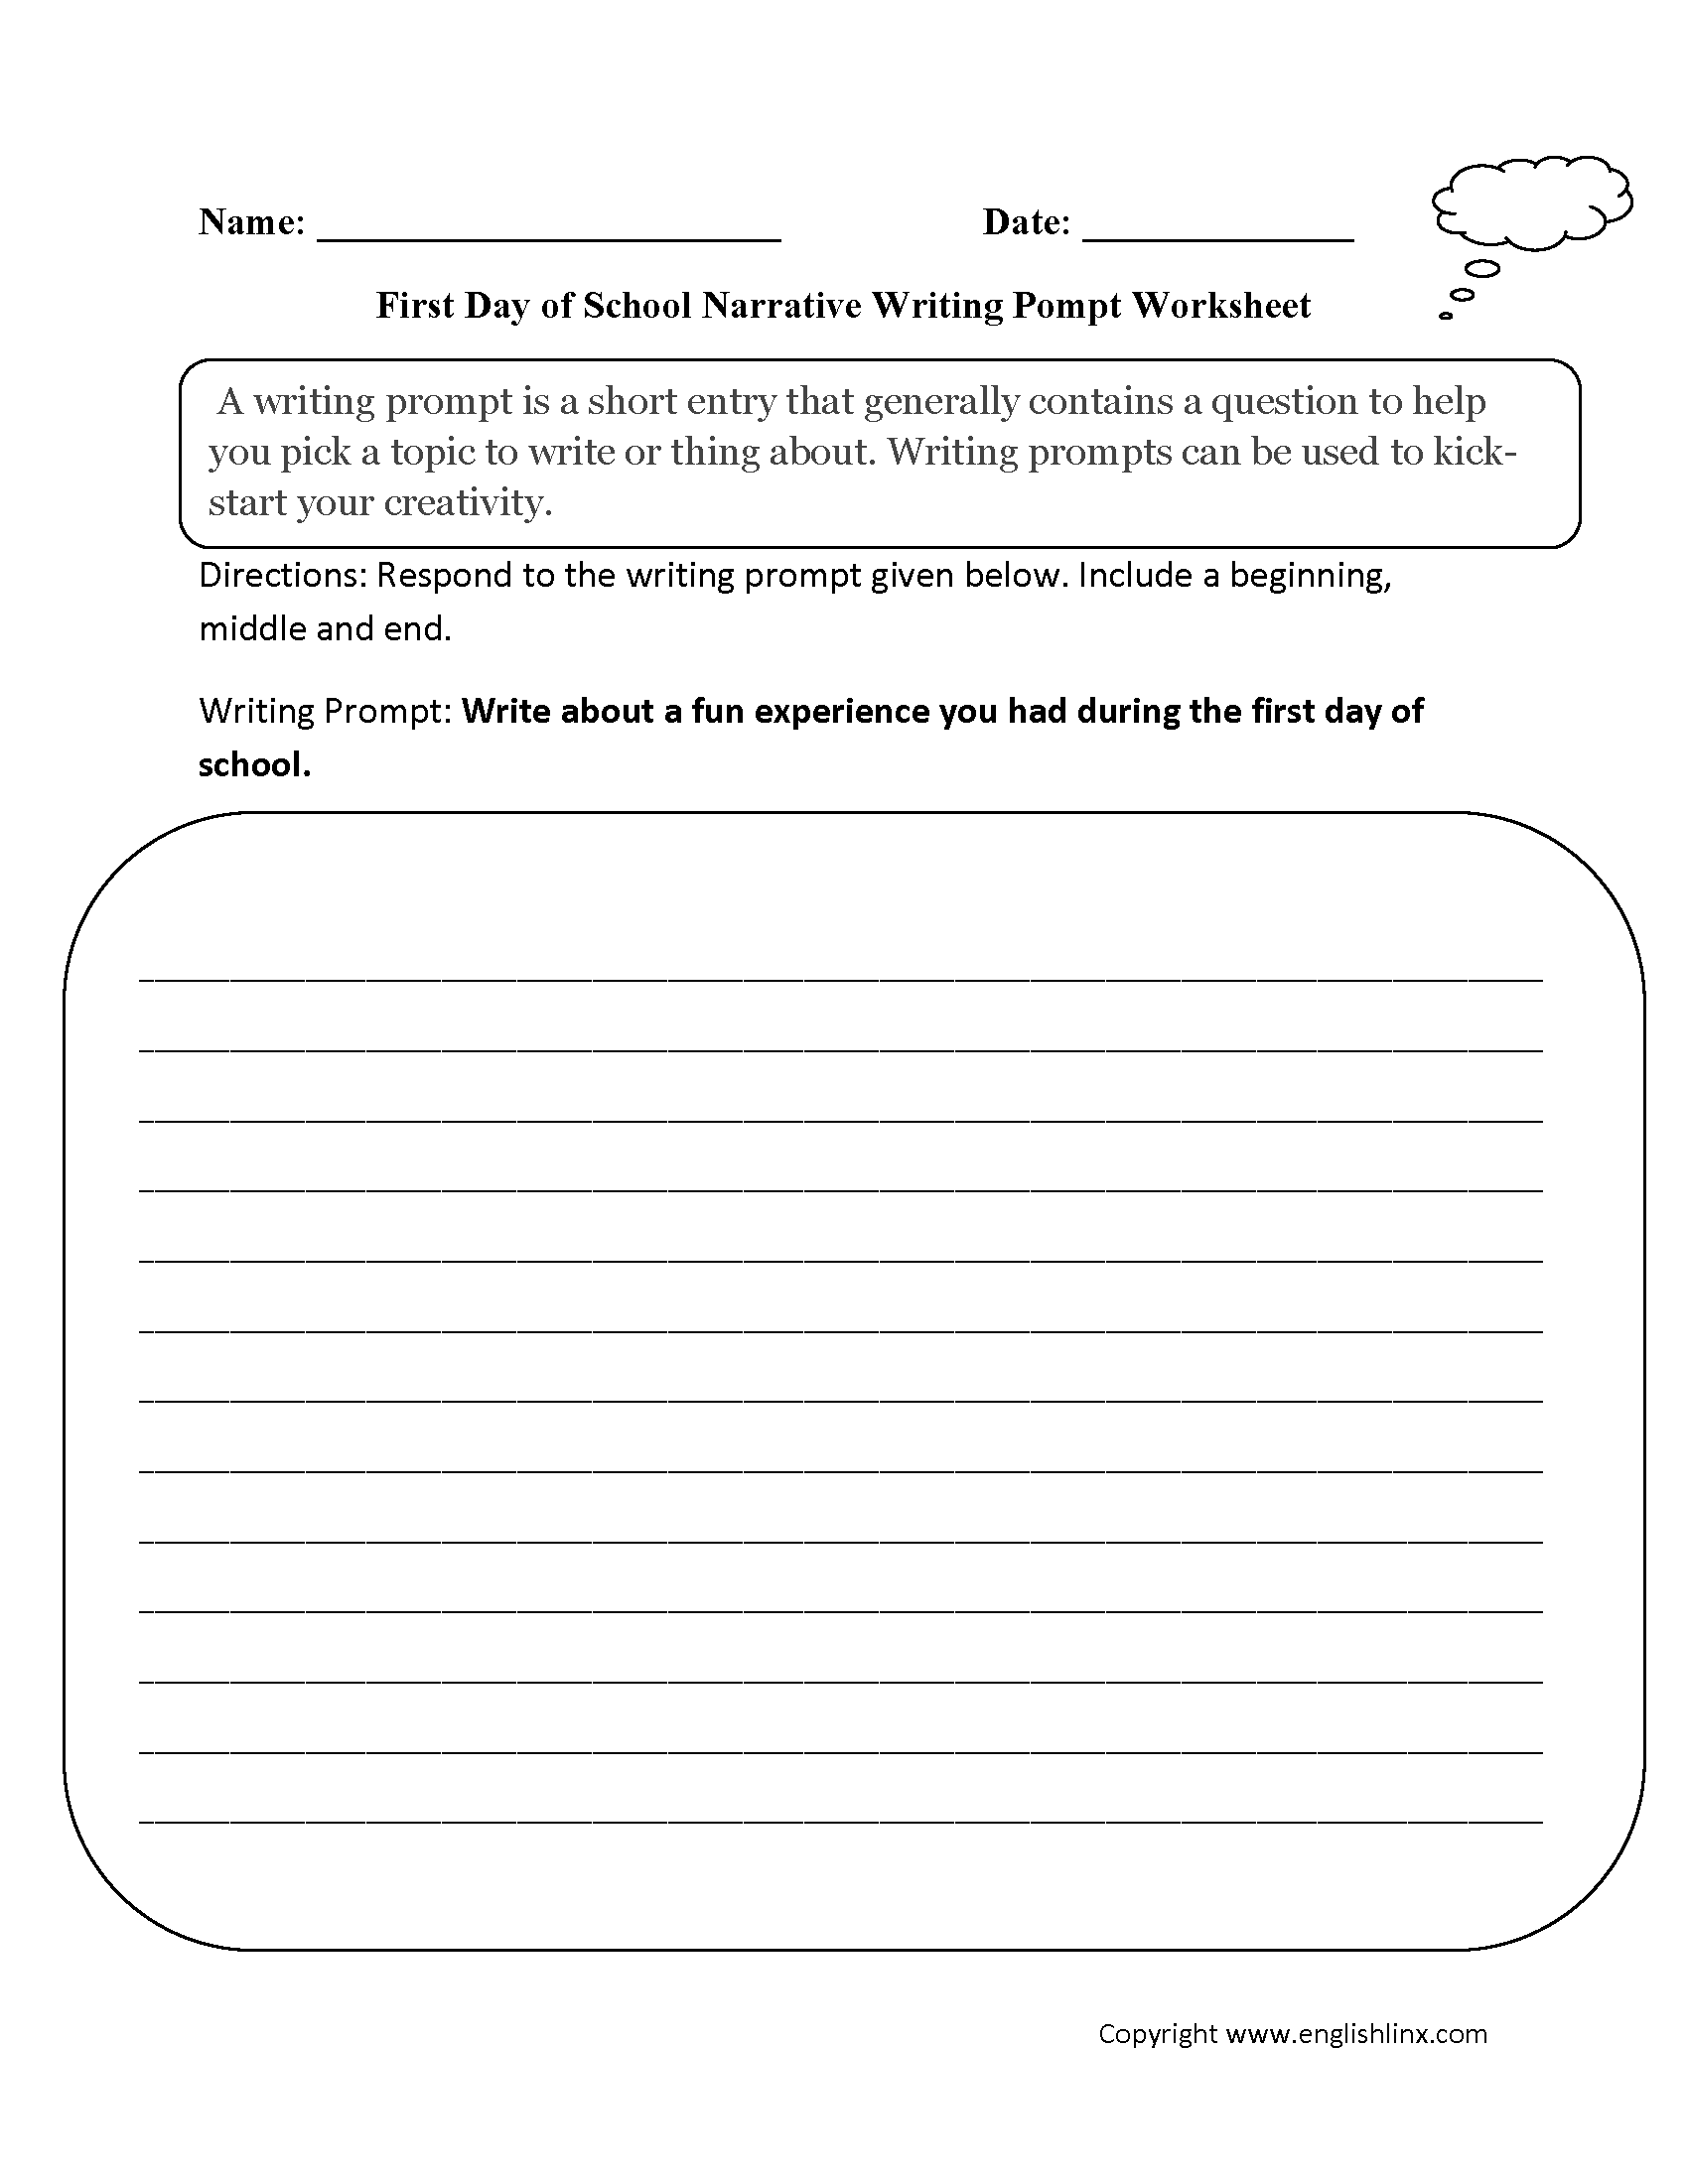 16 Best Images of 4th Grade Writing Prompts Worksheets - 4th Grade ...